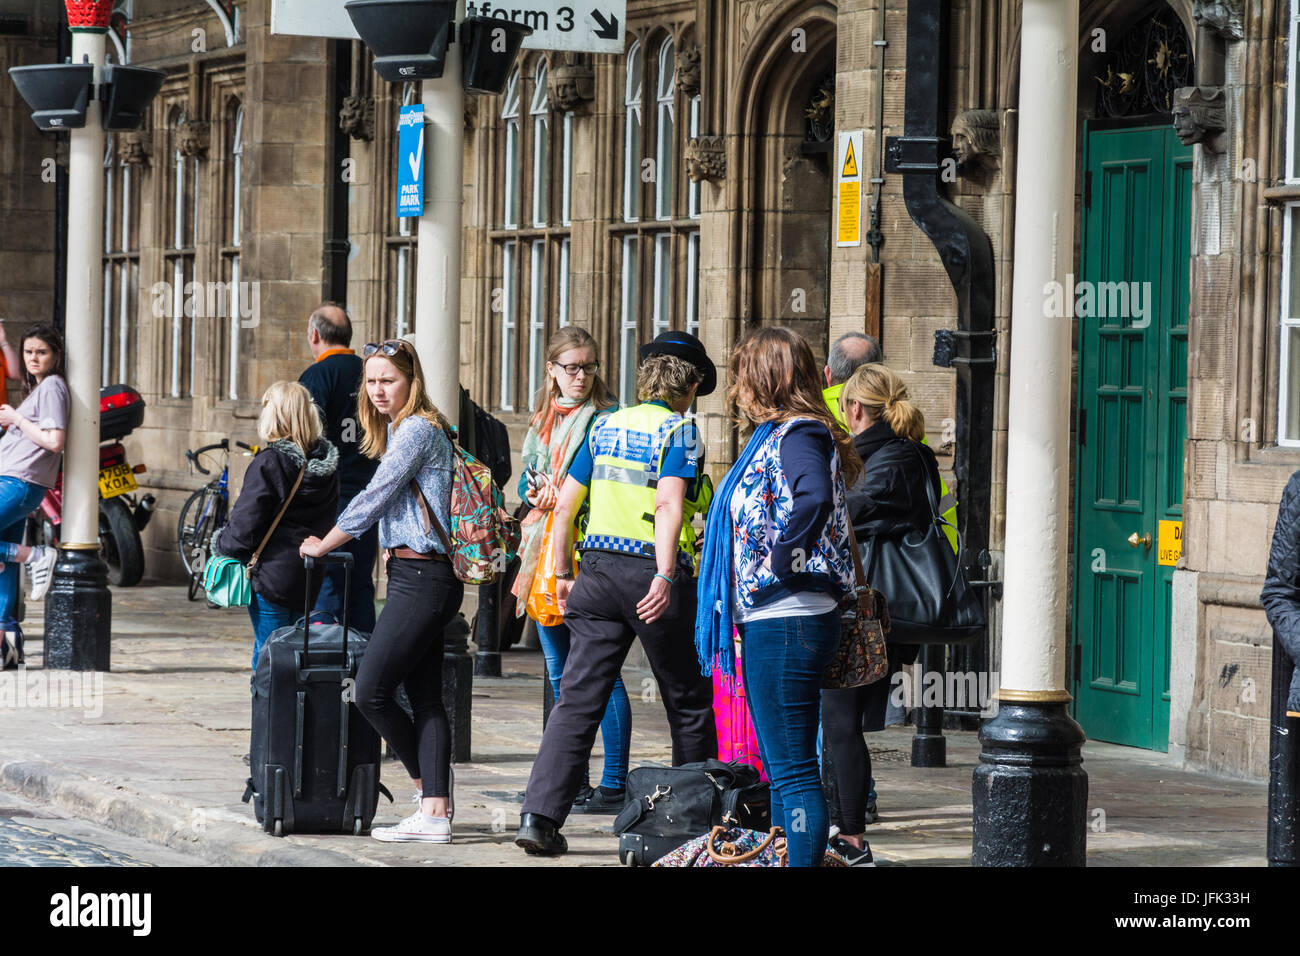 A candid street scene outside Shrewsbury train station. A community support officer is heading inside the building while commuters wait for transport. Stock Photo